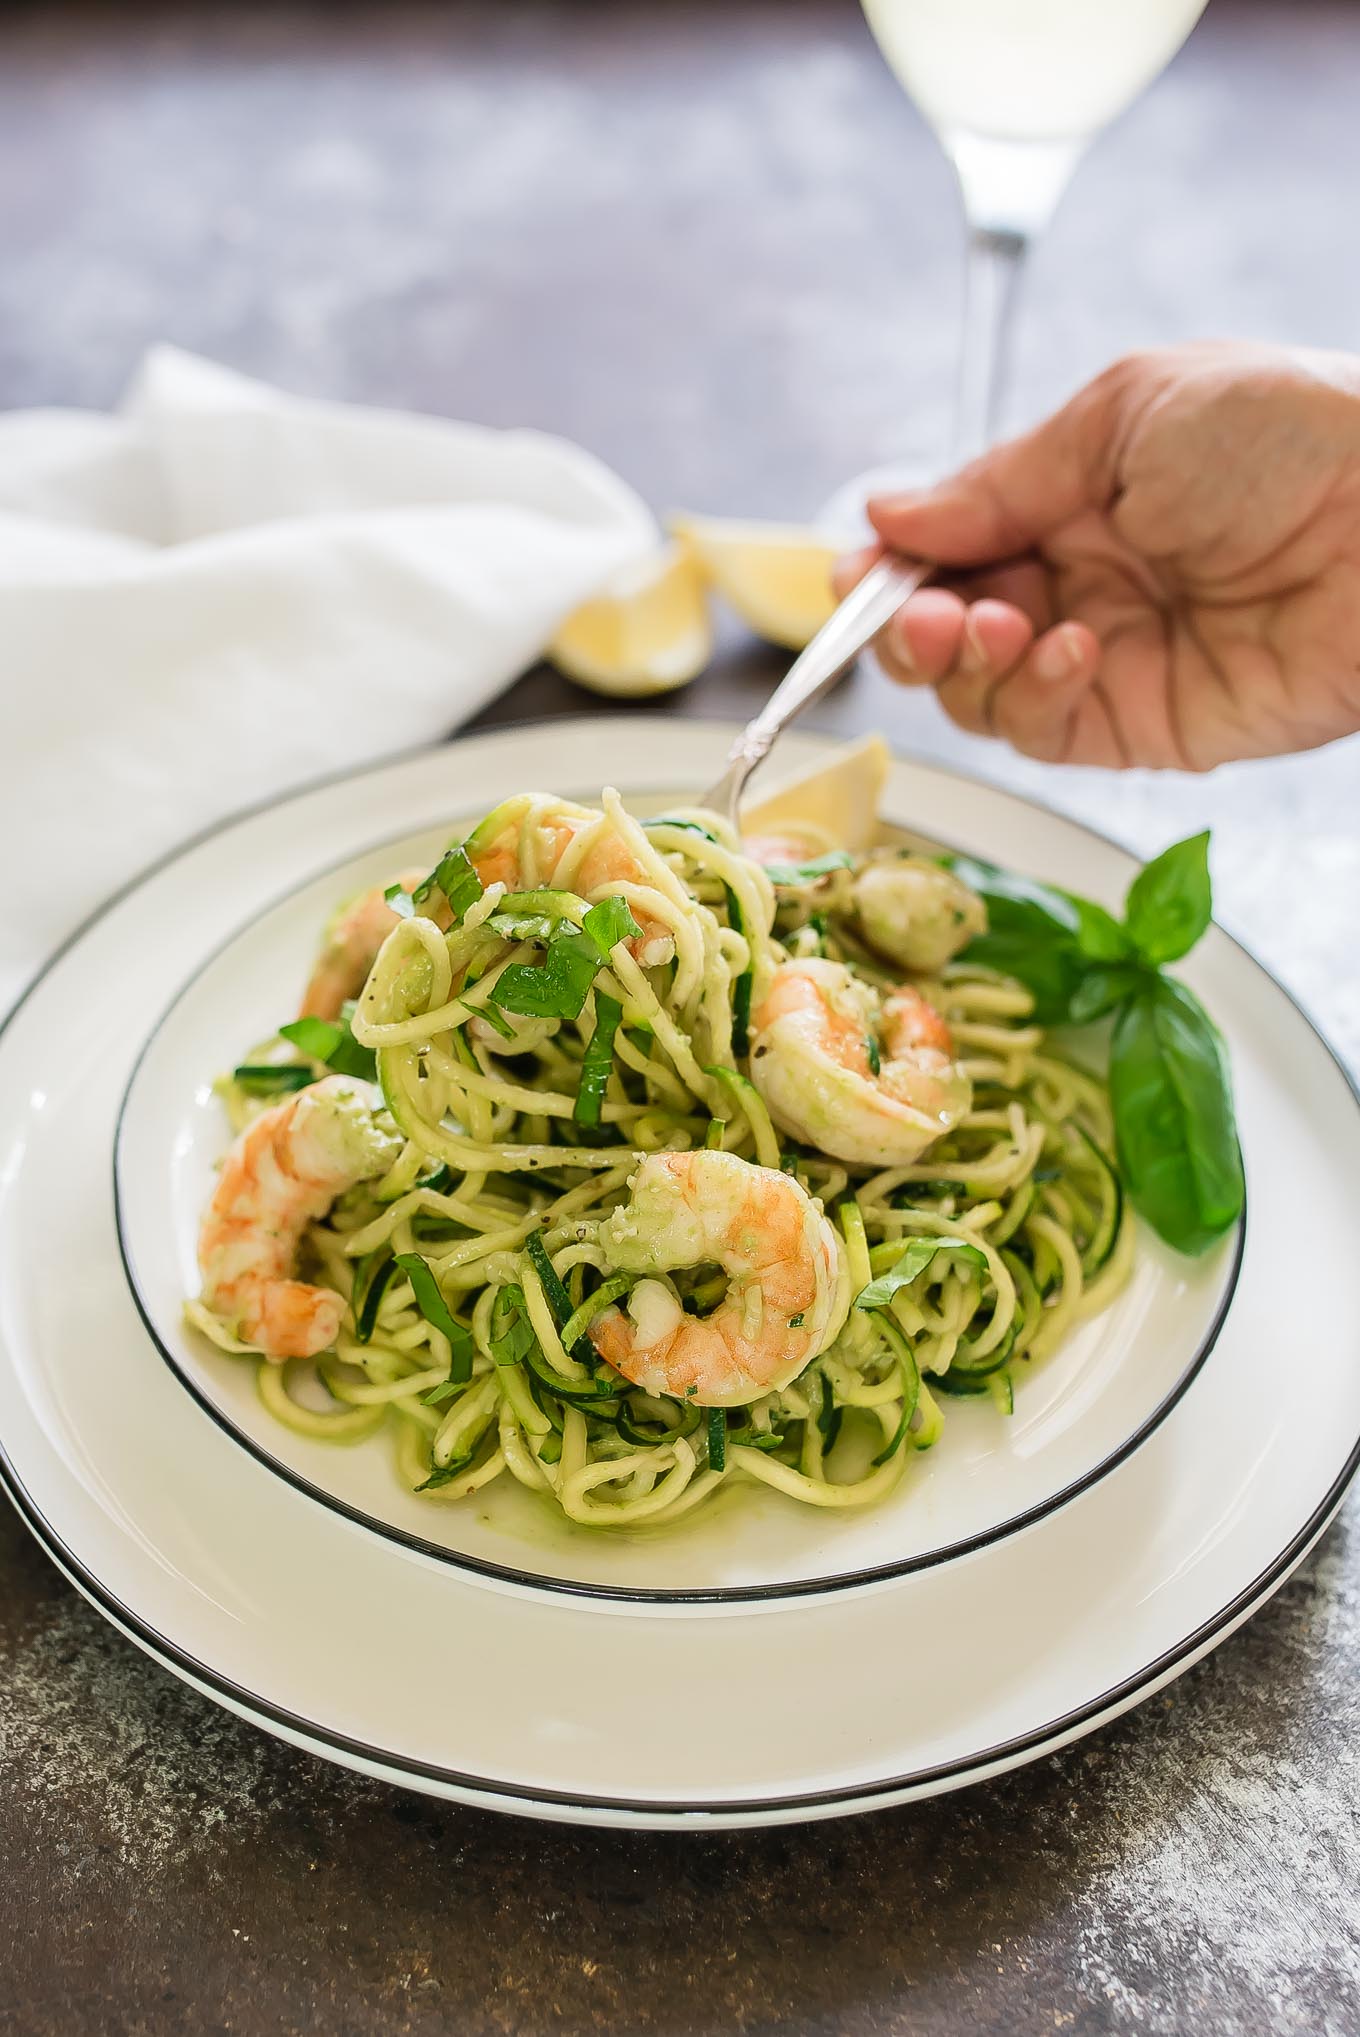 Creamy Basil Zucchini Noodles with Shrimp is a light and healthy dish, naturally gluten free, perfect for those light summer meals.